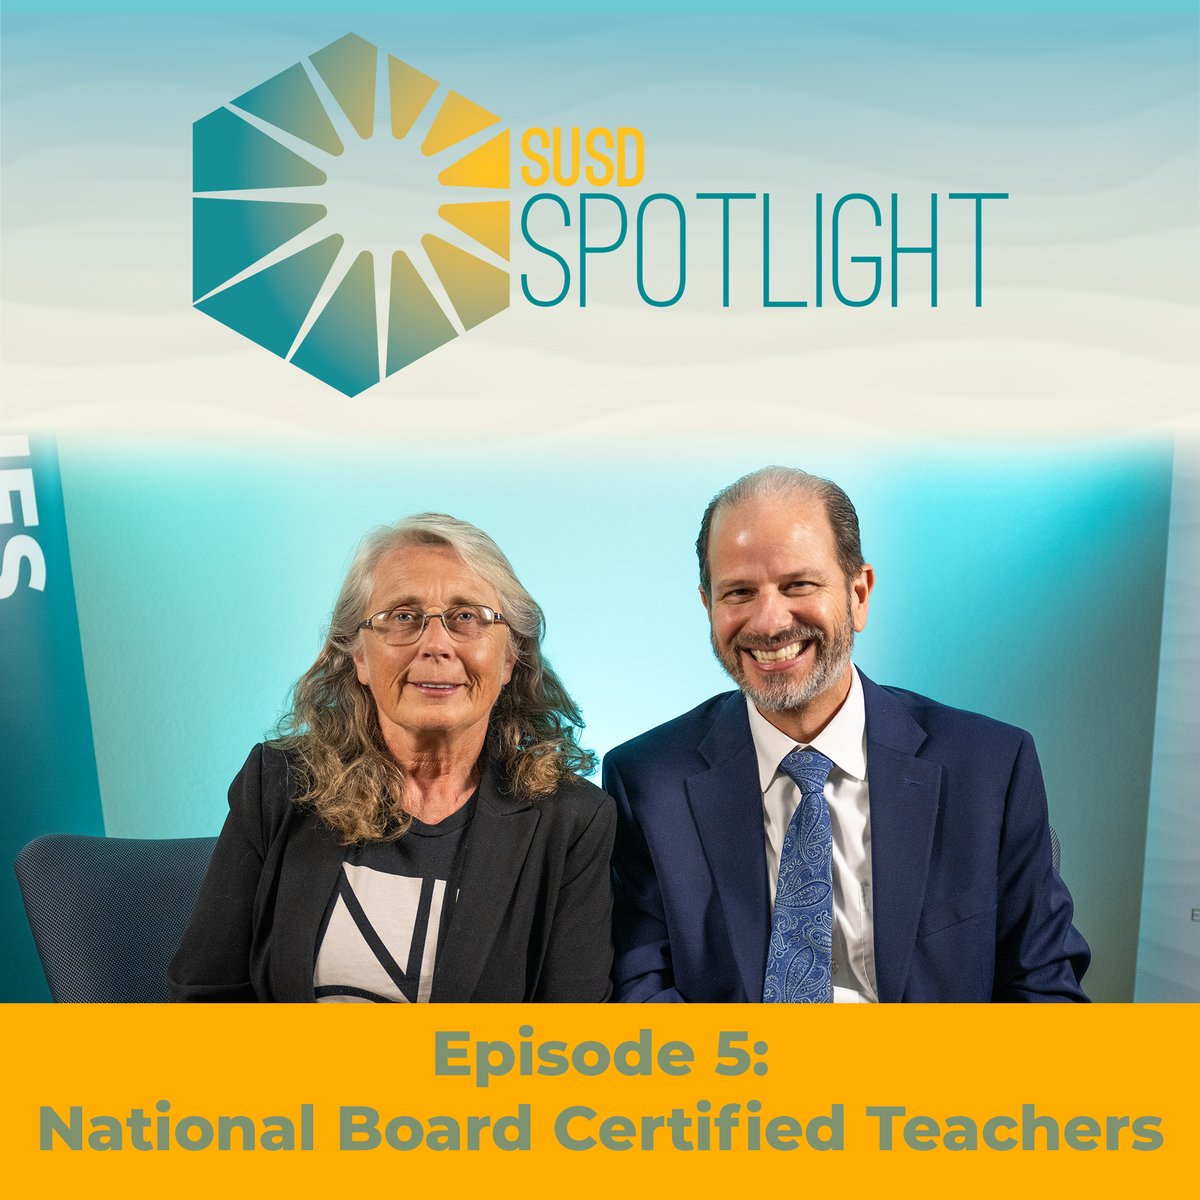 Tune in to the latest episode of the SUSD Spotlight podcast!  

Don't miss out – listen now at susd.org/spotlight or your favorite podcast platform! 

#SUSDSpotlight #NBCTs #TeacherExcellence #BecauseKids #OneTeam #SUSD #WorldClassFutureFocused